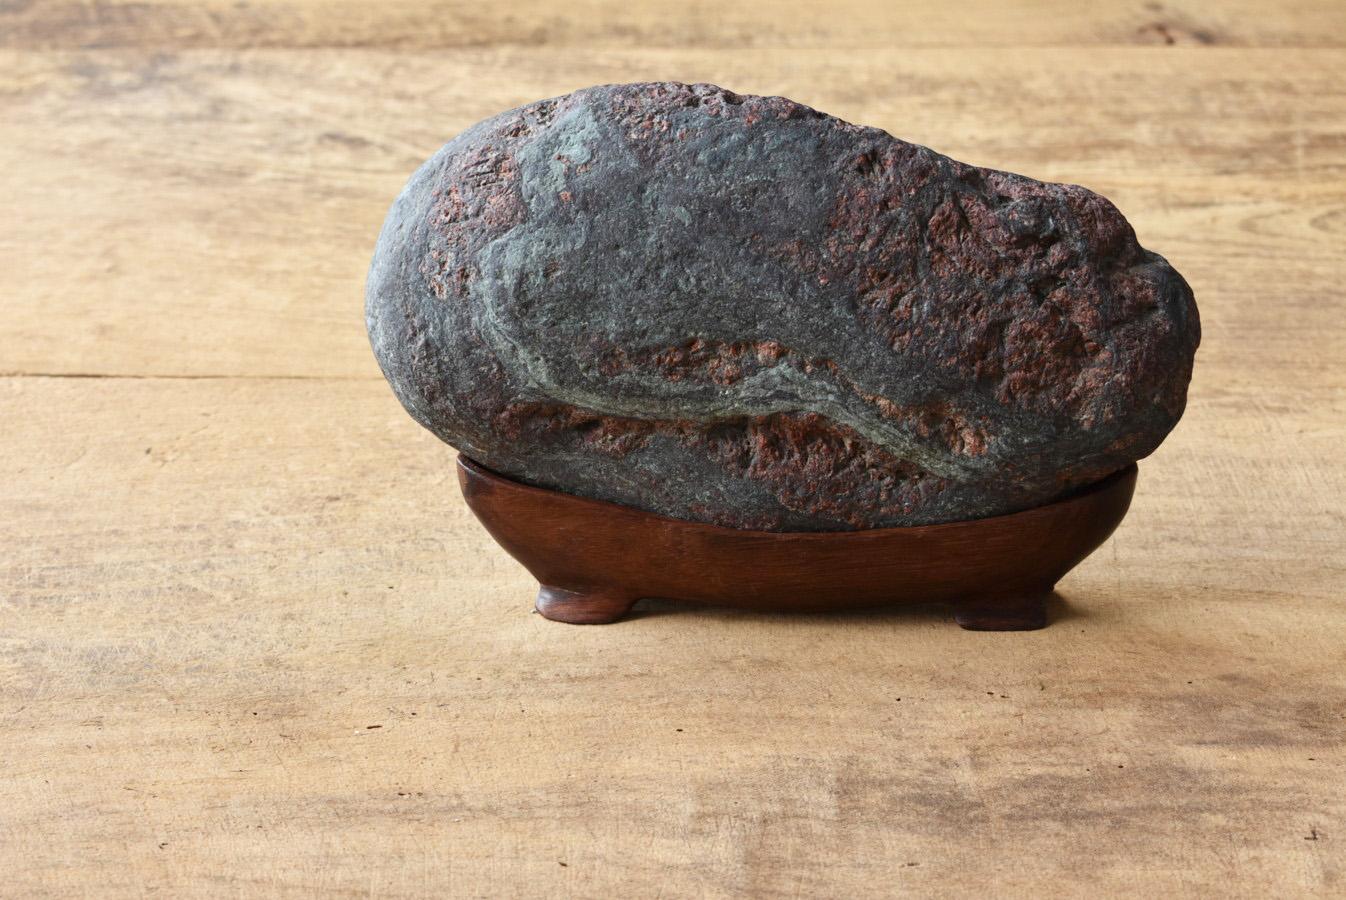 This is a stone mined in Japan. Measure: w 22cm.
Not only in China but also in Japan from ancient times, rocks in the mountains have been shaved and stones for viewing have been quarried.

Such stones for appreciation are collectively called